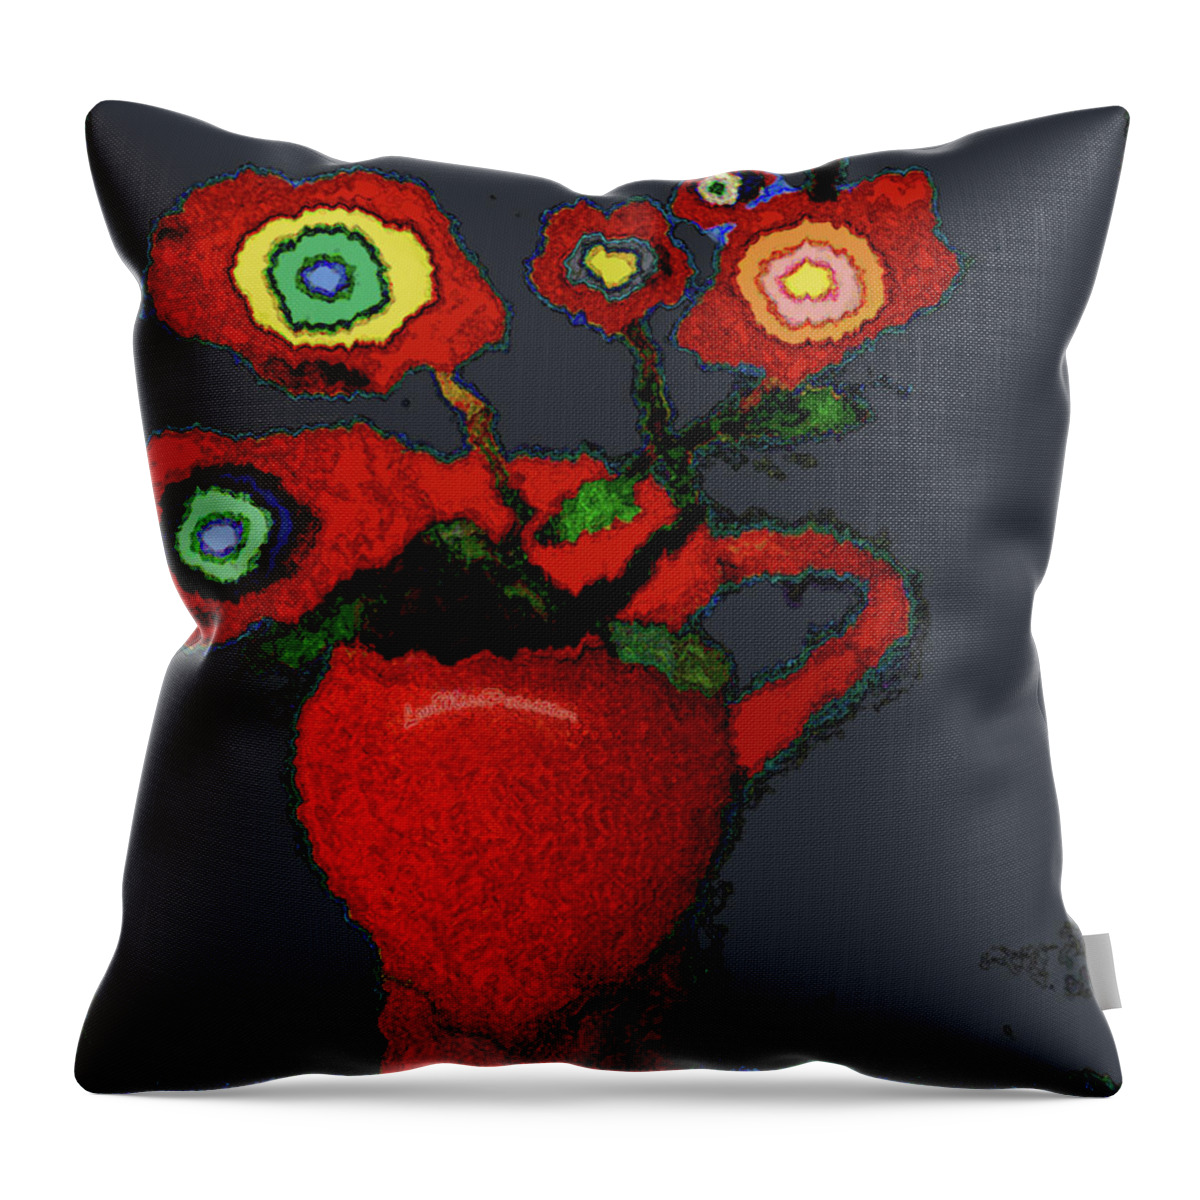 Posters Throw Pillow featuring the digital art Abstract Floral Art 90 by Miss Pet Sitter